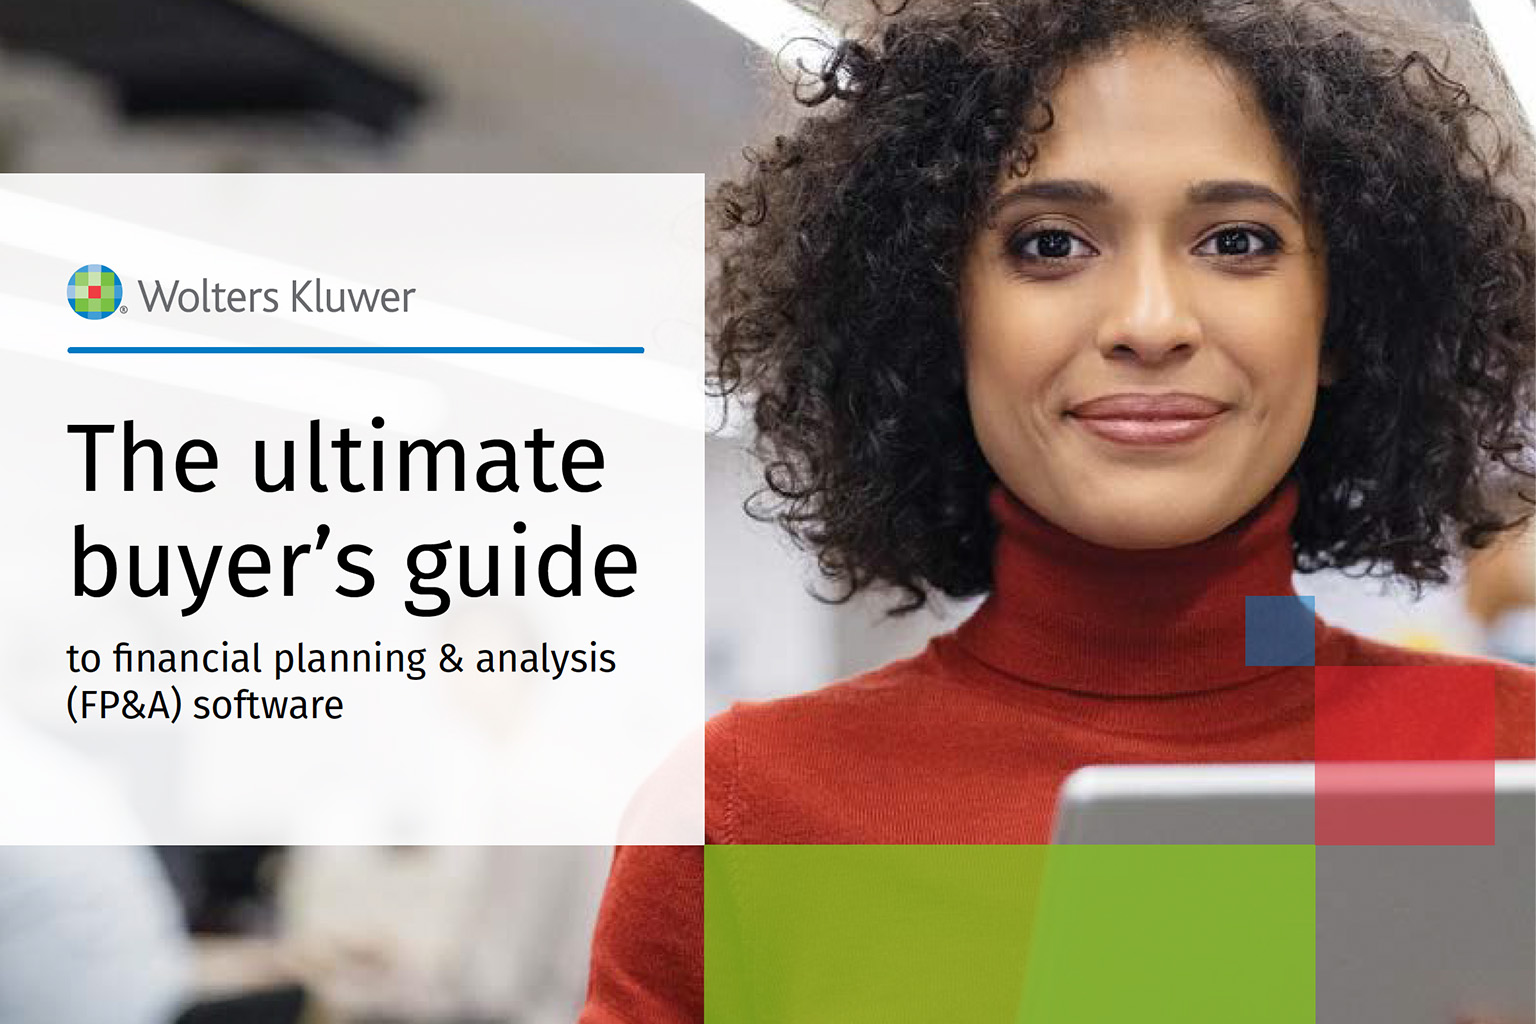 The ultimate buyer's guide to FP&A software